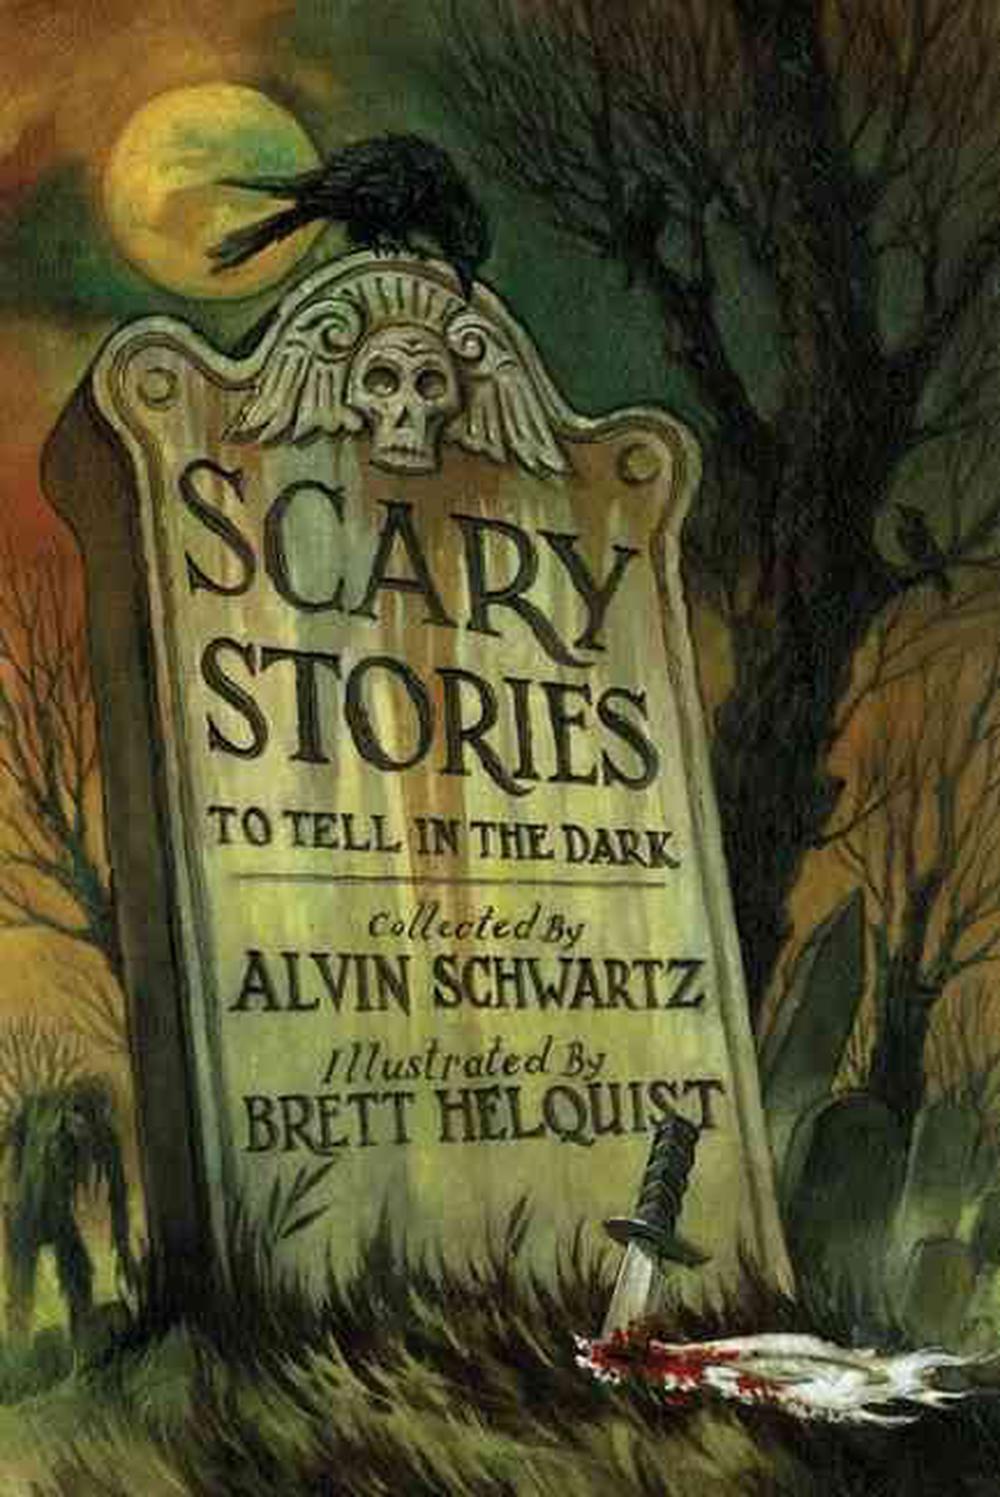 Scary Stories to Read When It